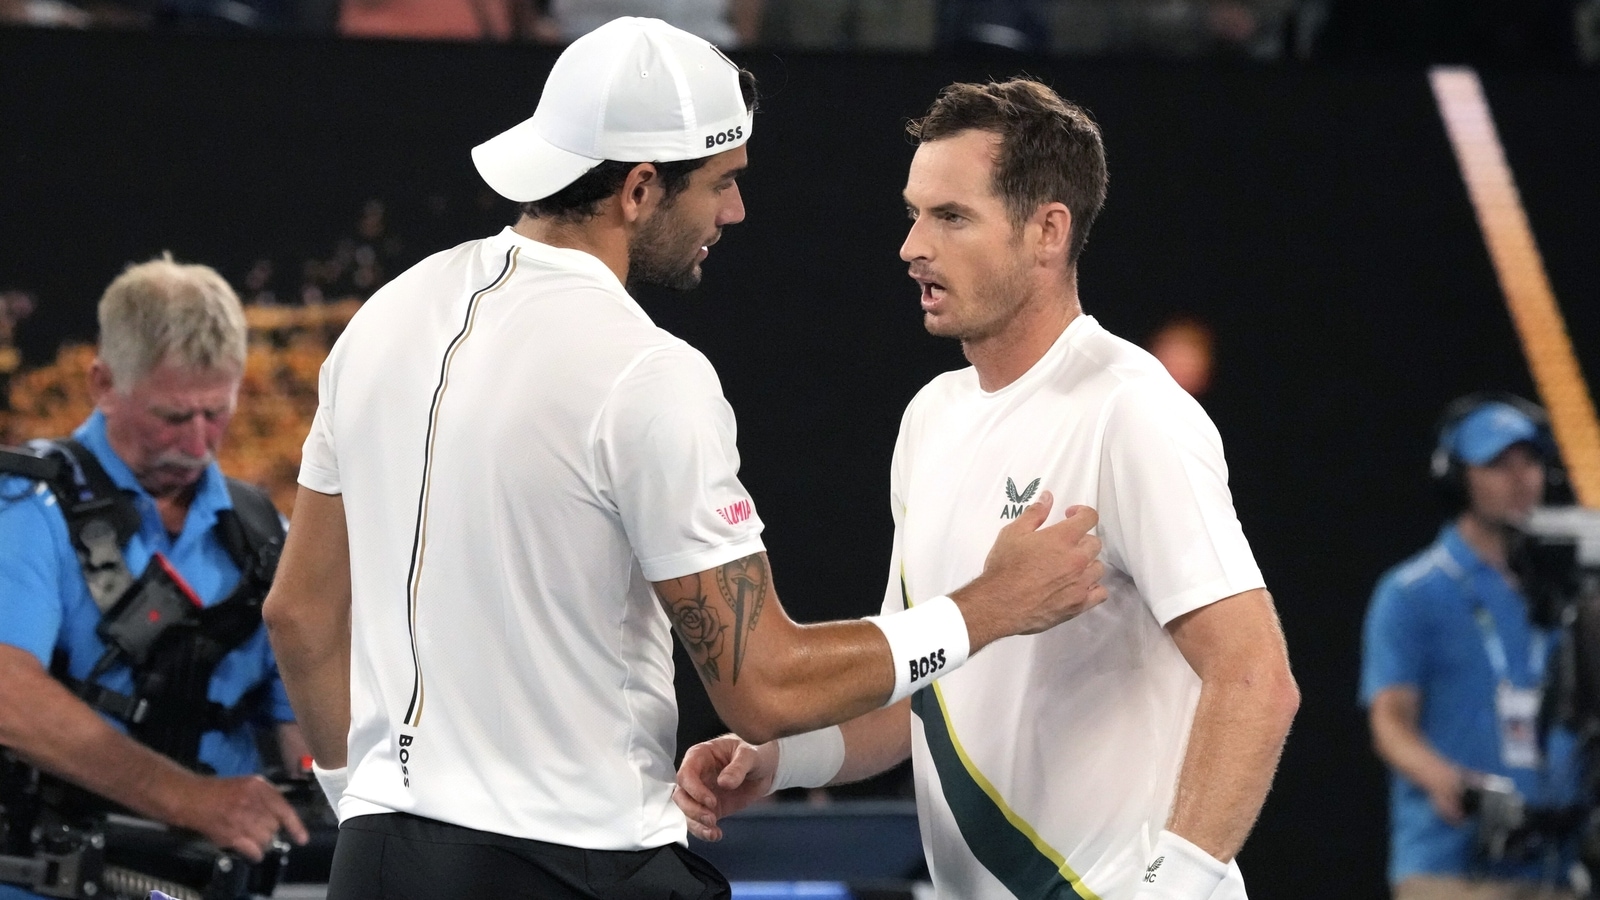 Andy Murray turns back the clock to fell Matteo Berrettini in five-set epic at Australian Open 2023